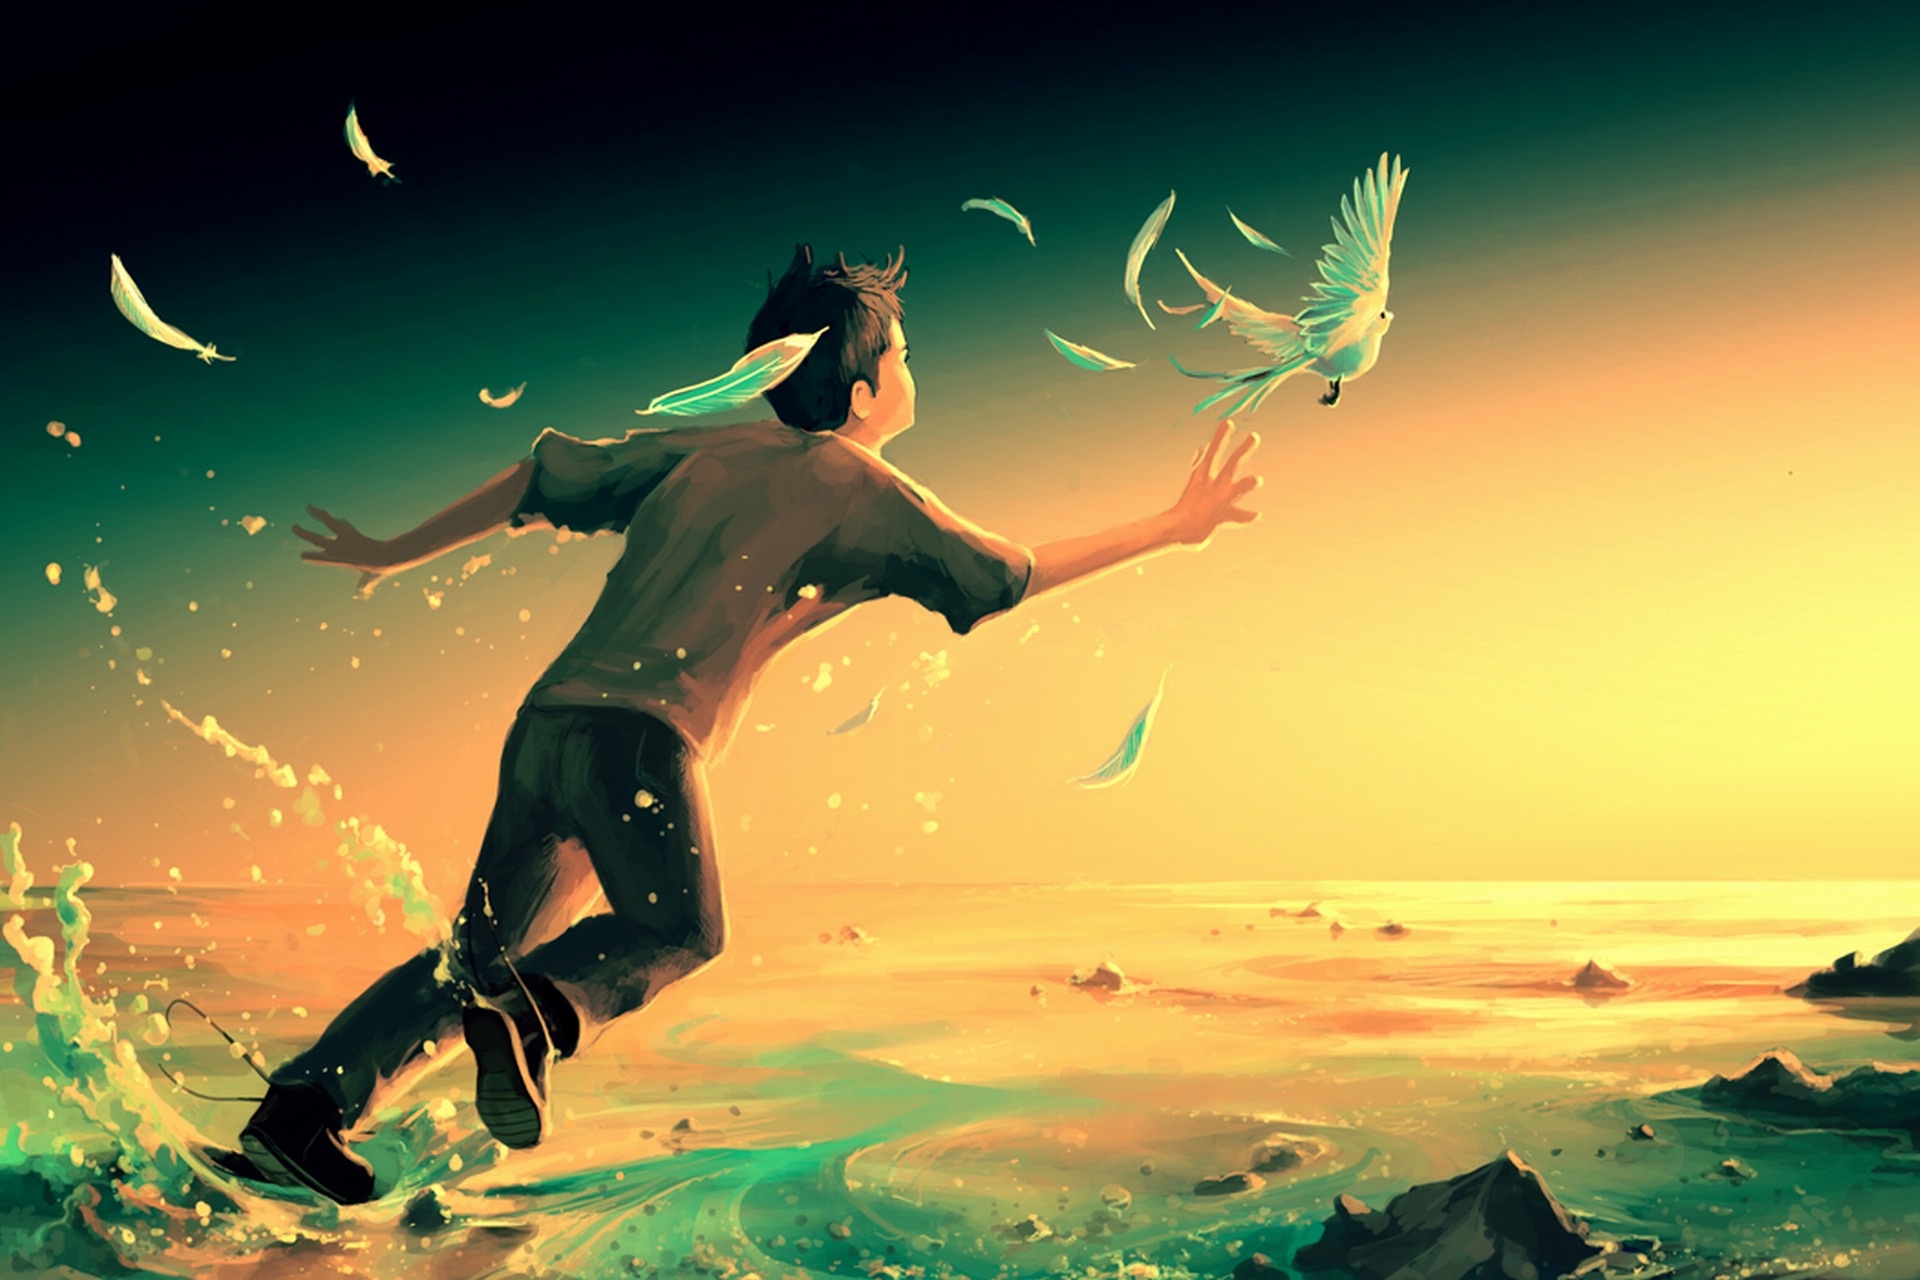 Cute boy with flying bird fantasy wallpapers | HD Wallpapers Rocks